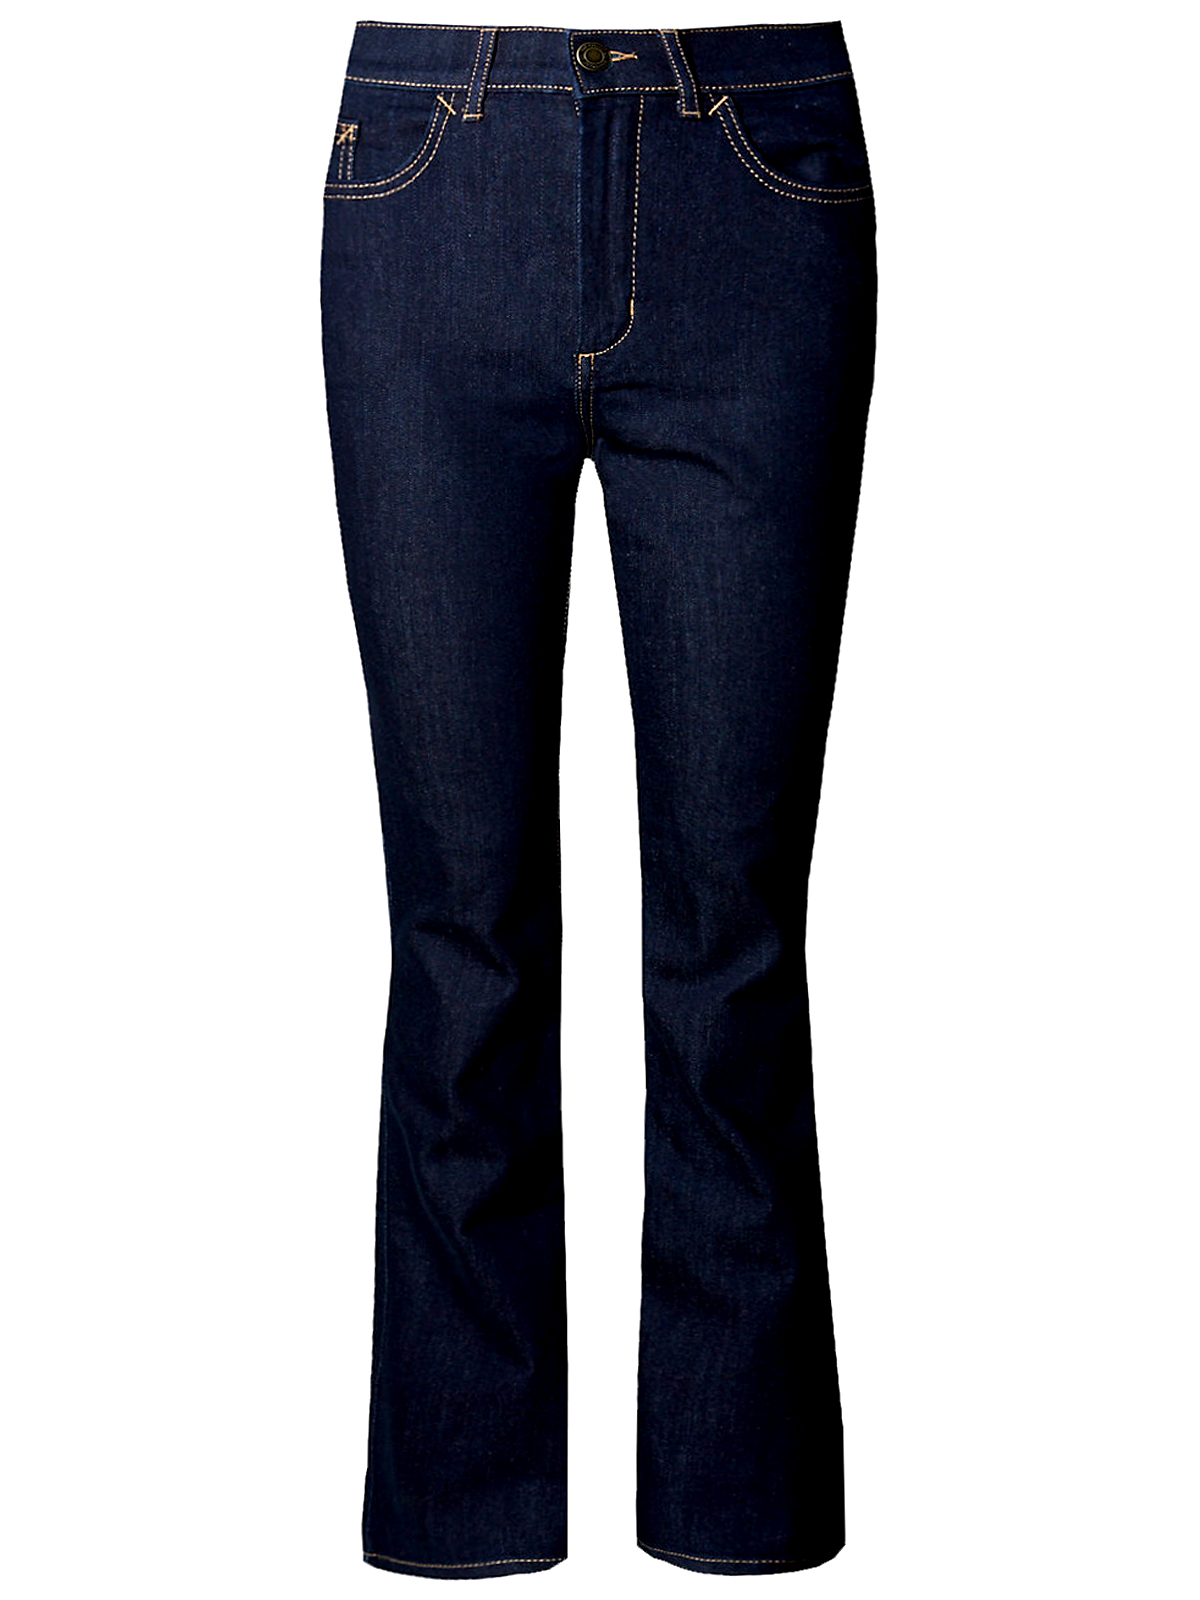 Marks and Spencer - - M&5 INDIGO Ozone Bootcut Jeans - Size 12